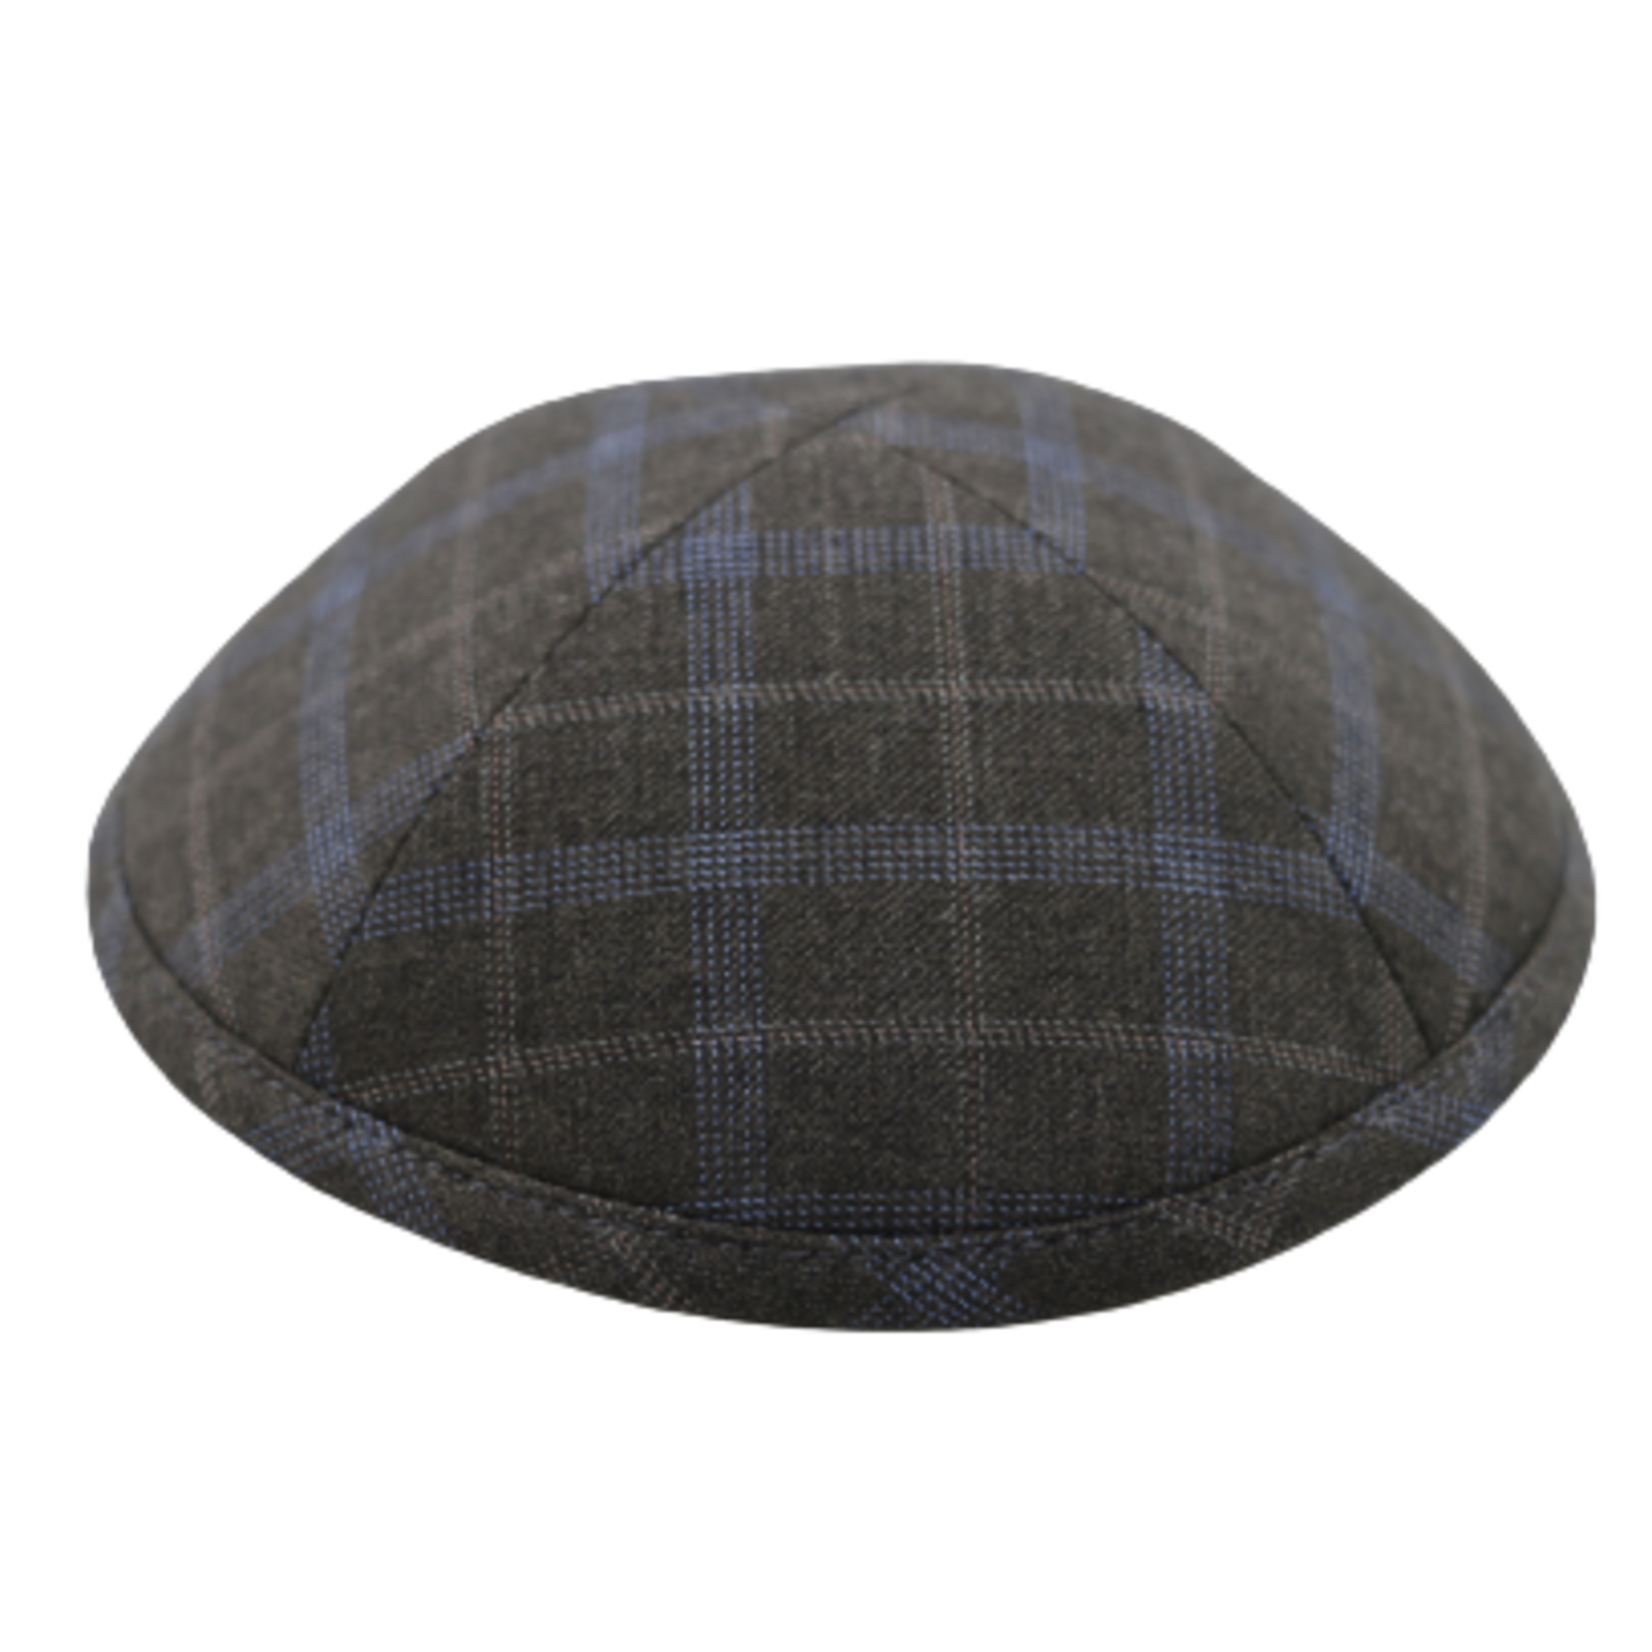 Coolkippahs Suit Brown Plaid with Clips